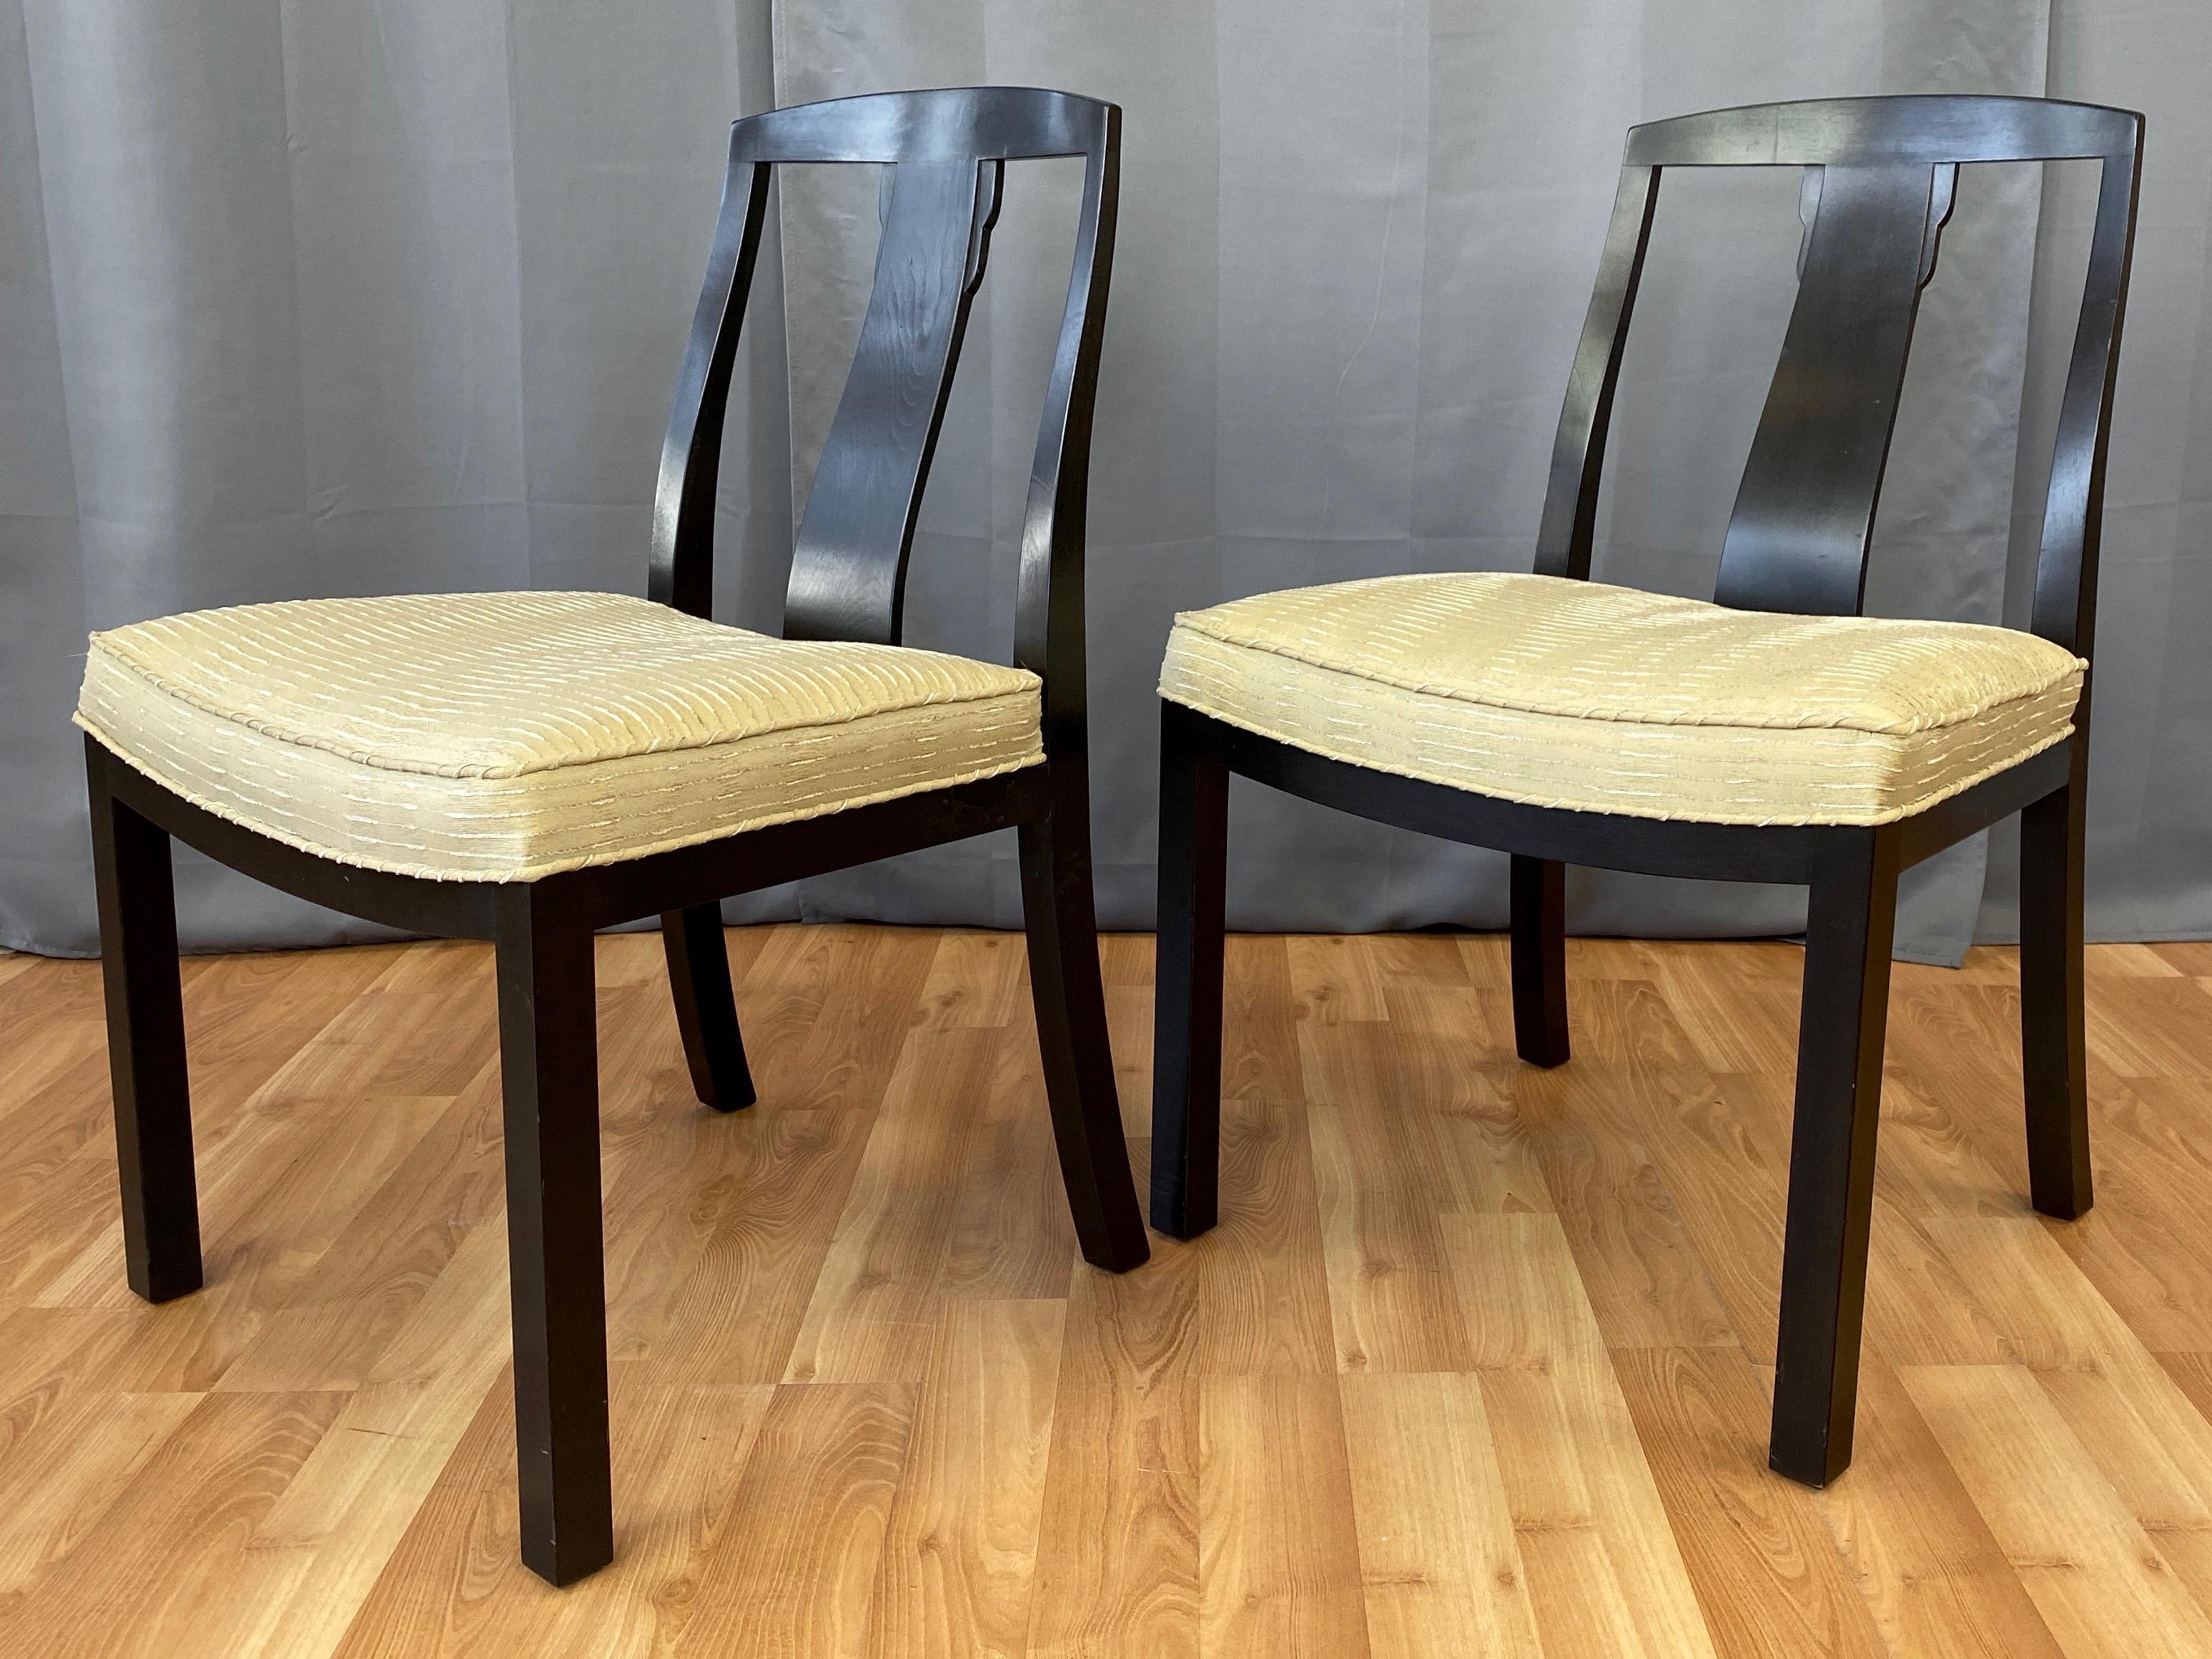 A pair of 1950s Hollywood Regency dining or side chairs by Michael Taylor for Baker Furniture.

Very handsome design distinguished by clean lines and a elegantly curved T-shaped back with subtle detailing. Original ebonized finish walnut with rich